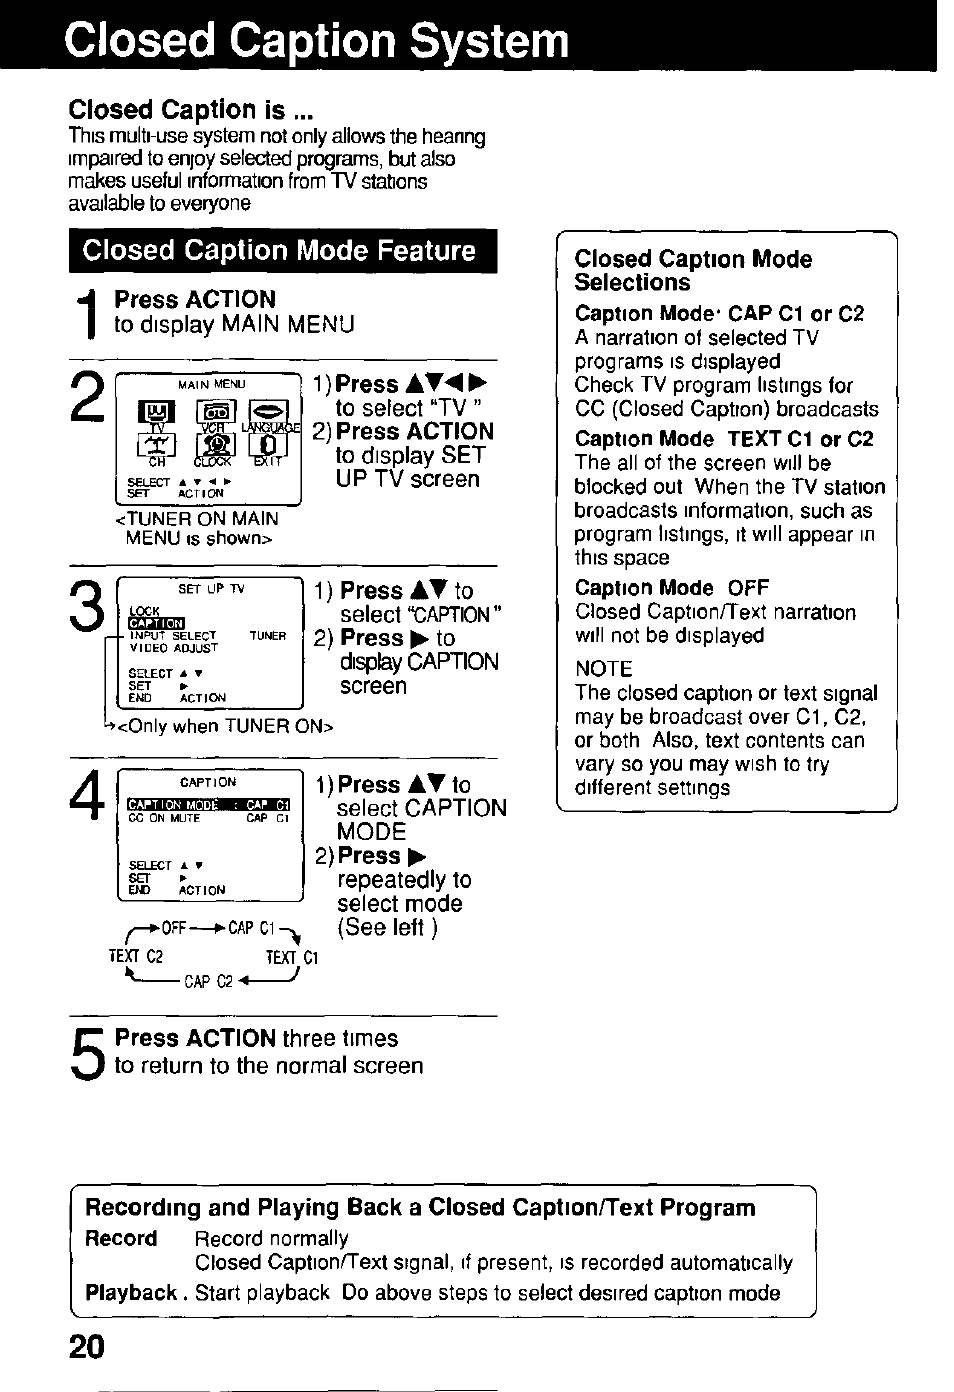 Closed caption system, Press action, 1) press at | 2) press action, 2) press, Closed caption mode selections, Closed caption is, Closed caption mode feature | Panasonic Combinatin VCR AG-513E User Manual | Page 20 / 40